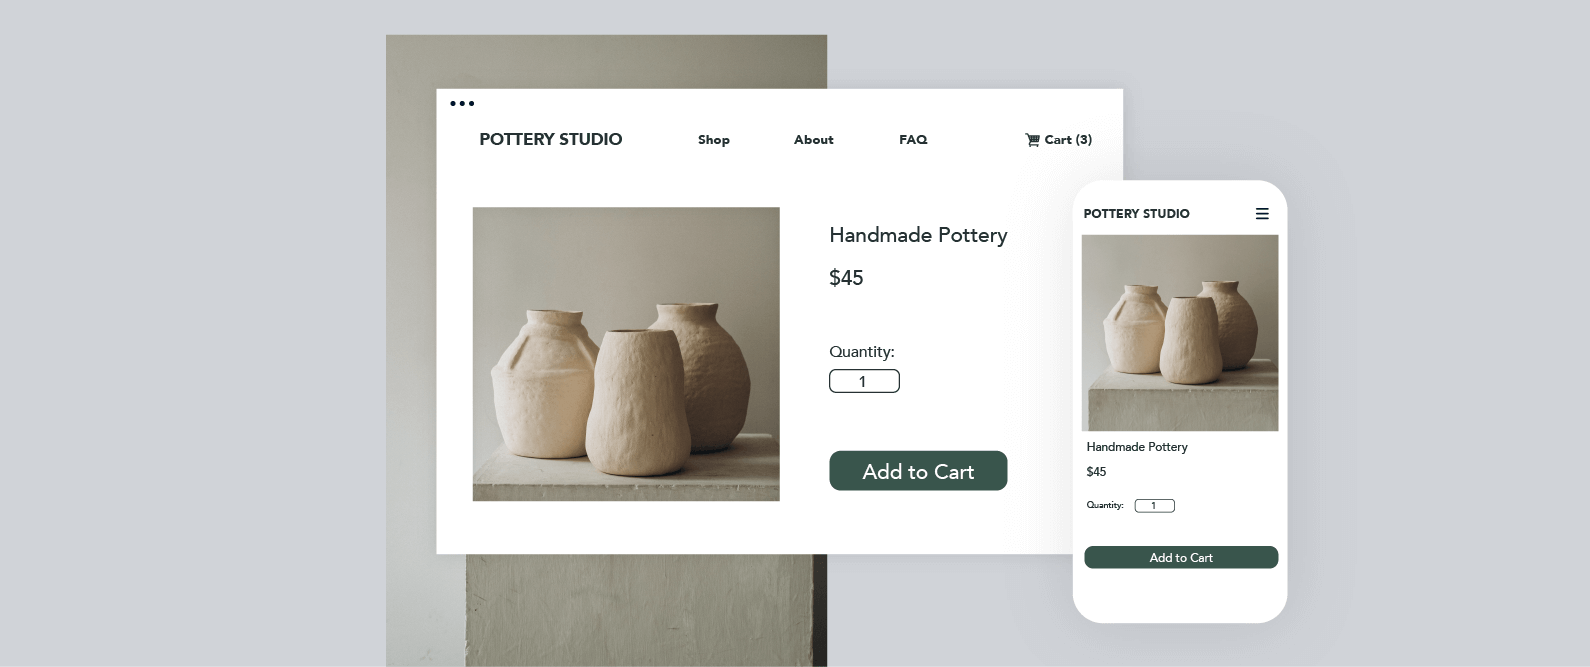 Creating Your Online Store